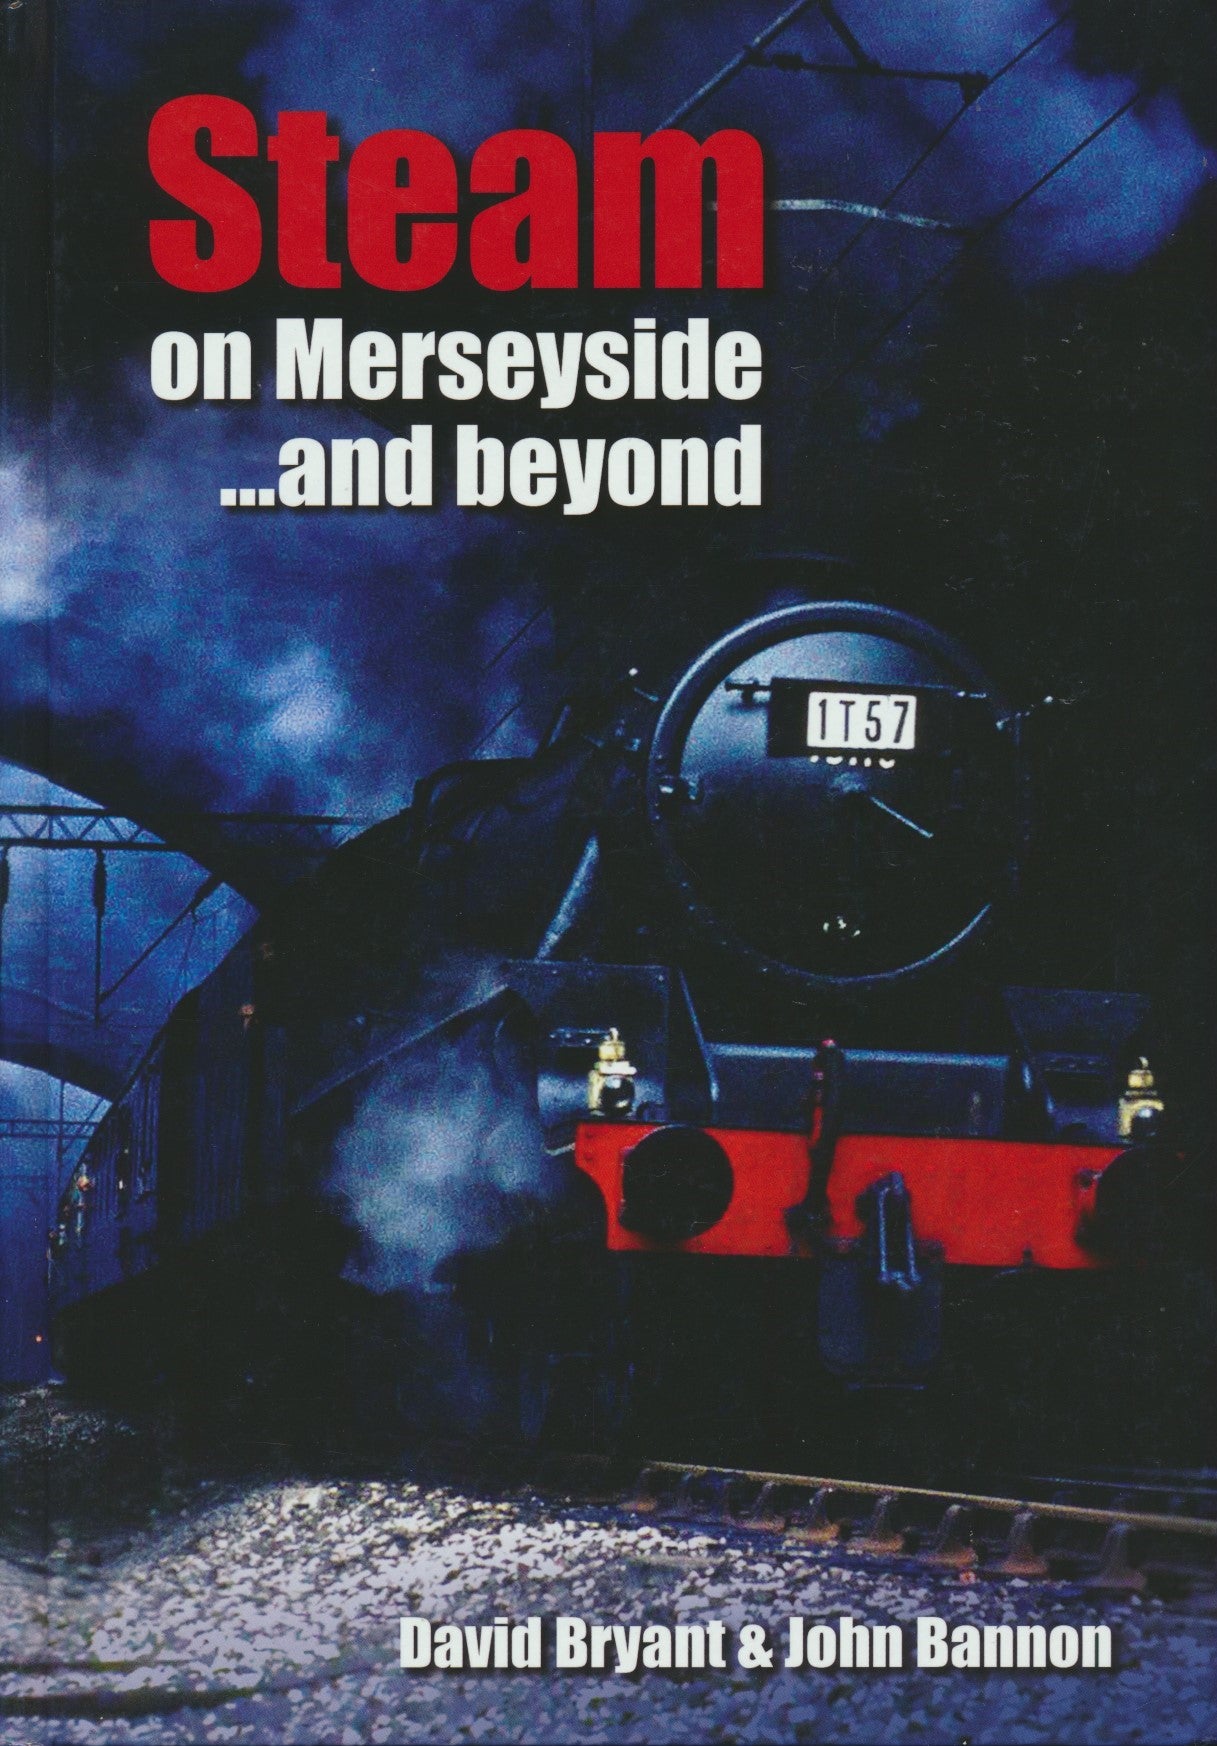 Steam on Merseyside.... and beyond